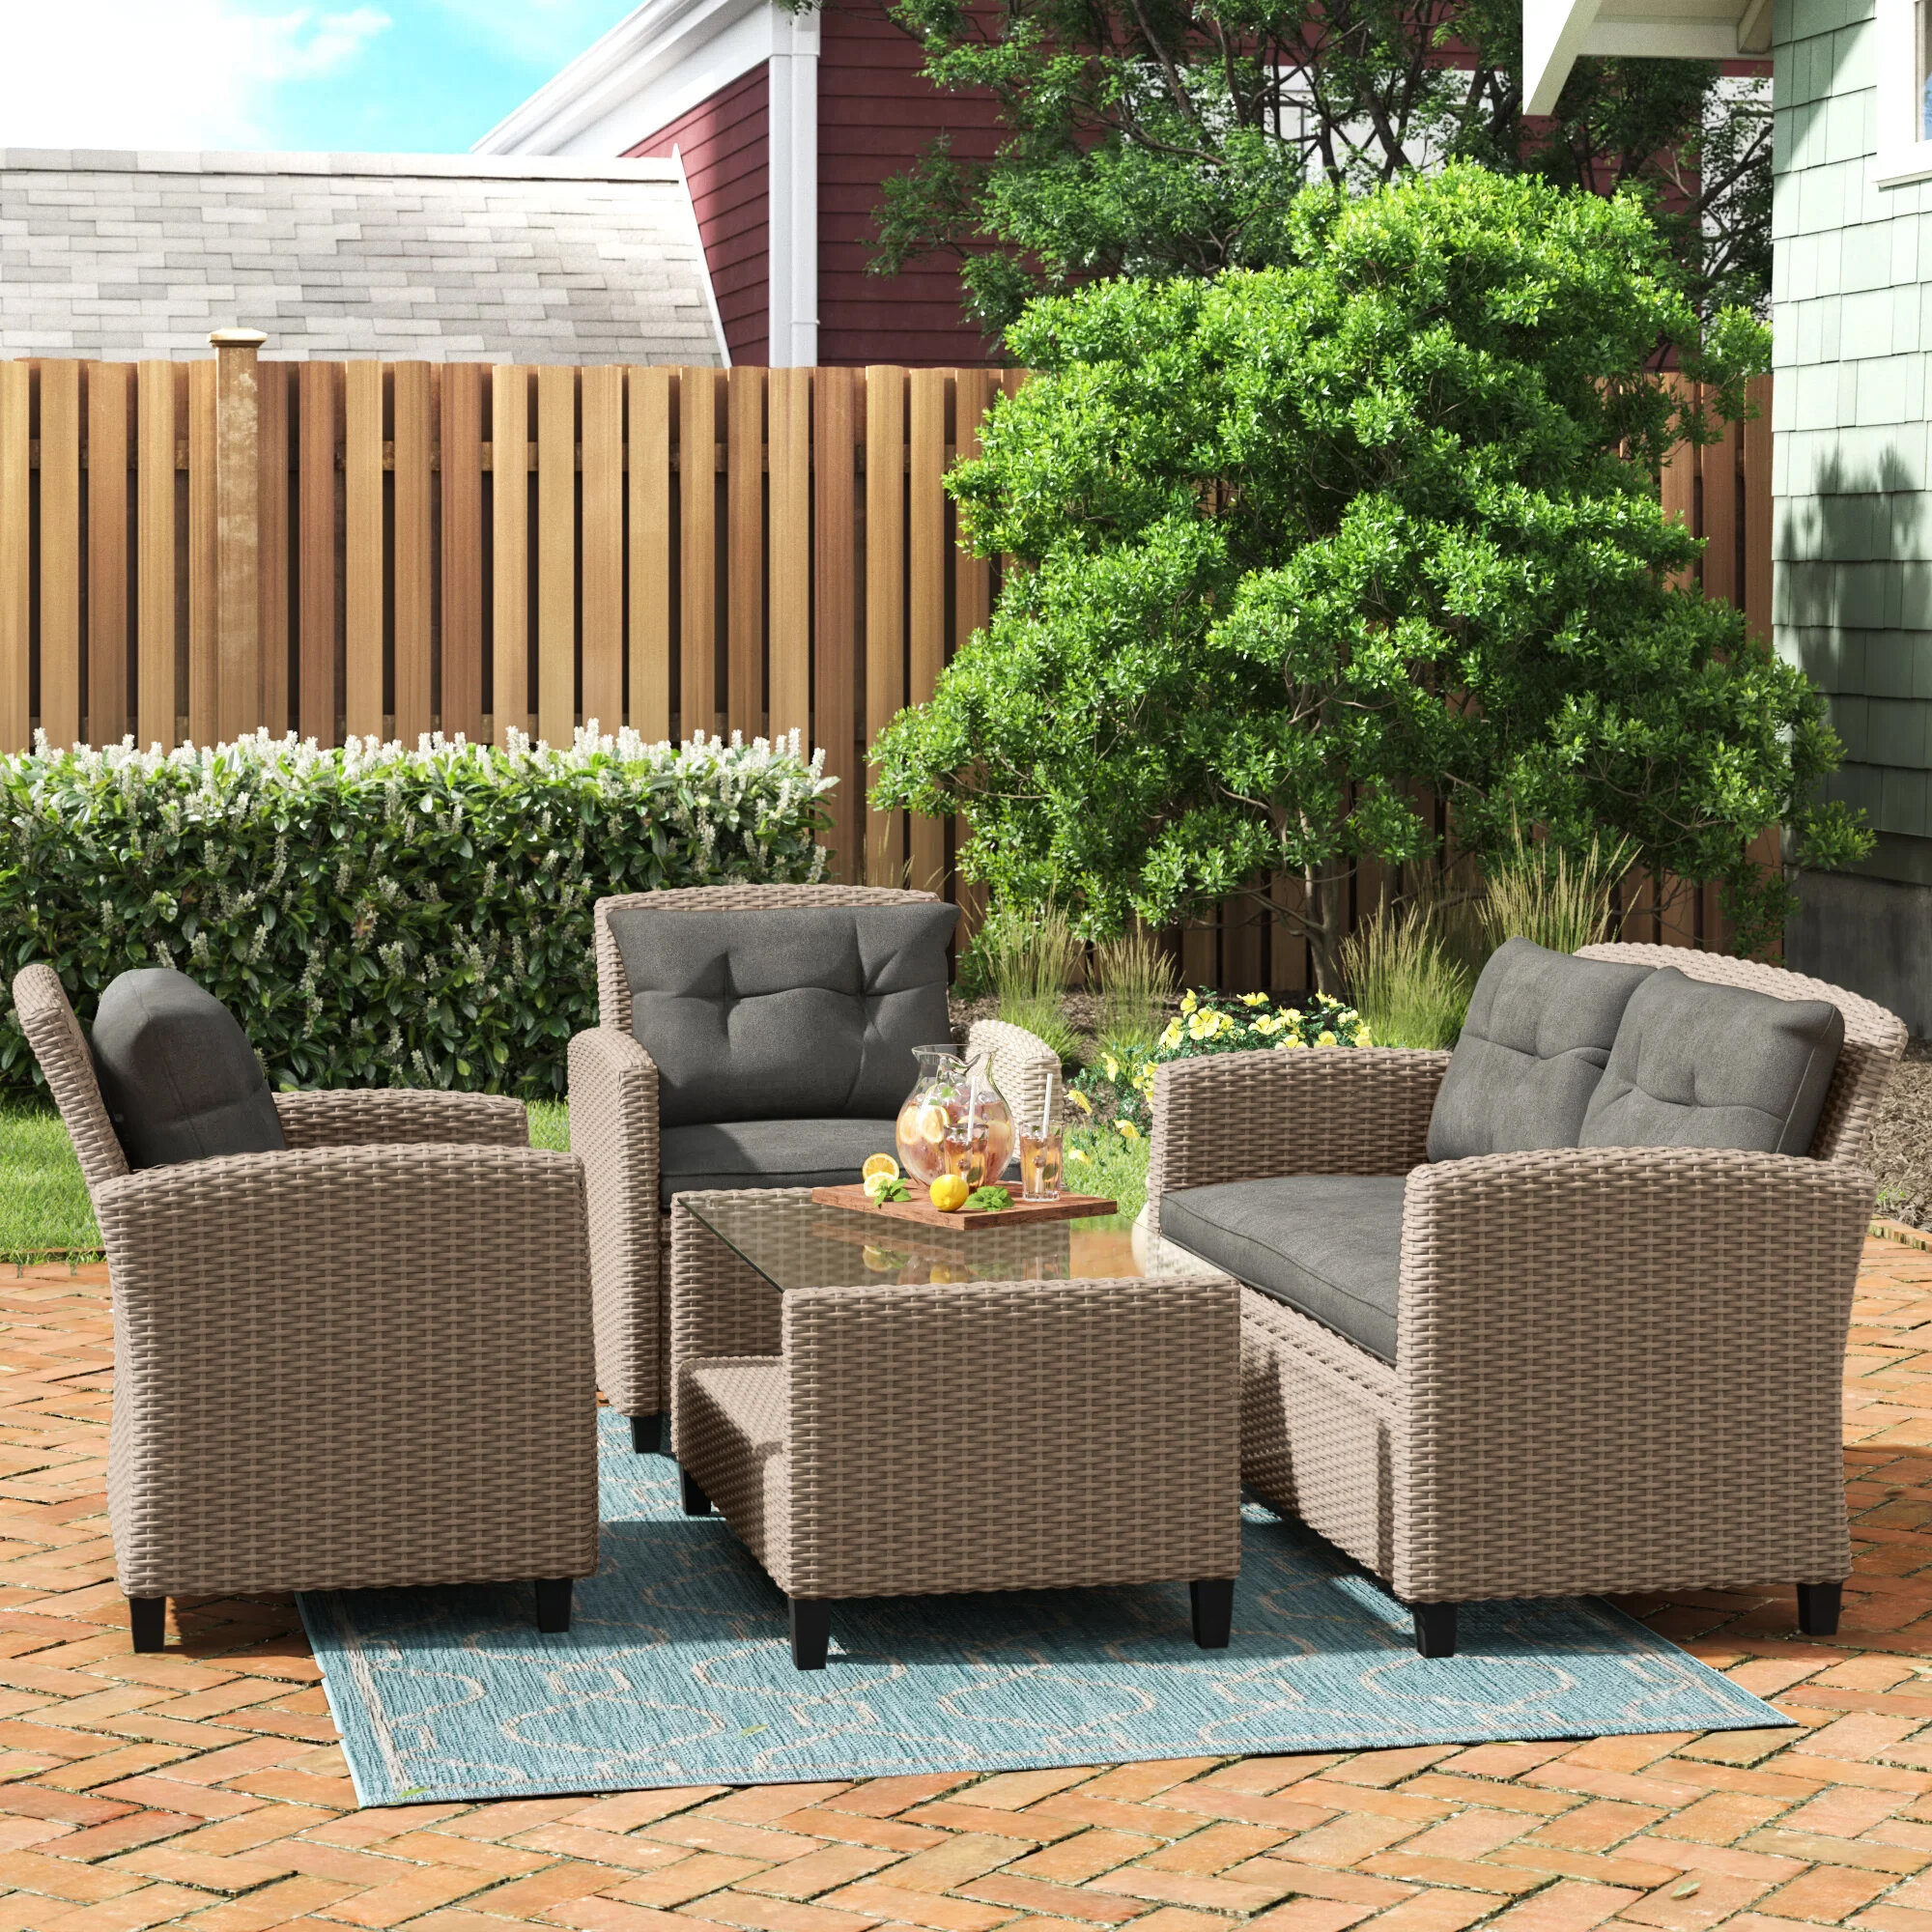 2 Seater Rattan Chair Garden Patio Outdoor Furniture Wicker Love Seat With Table 